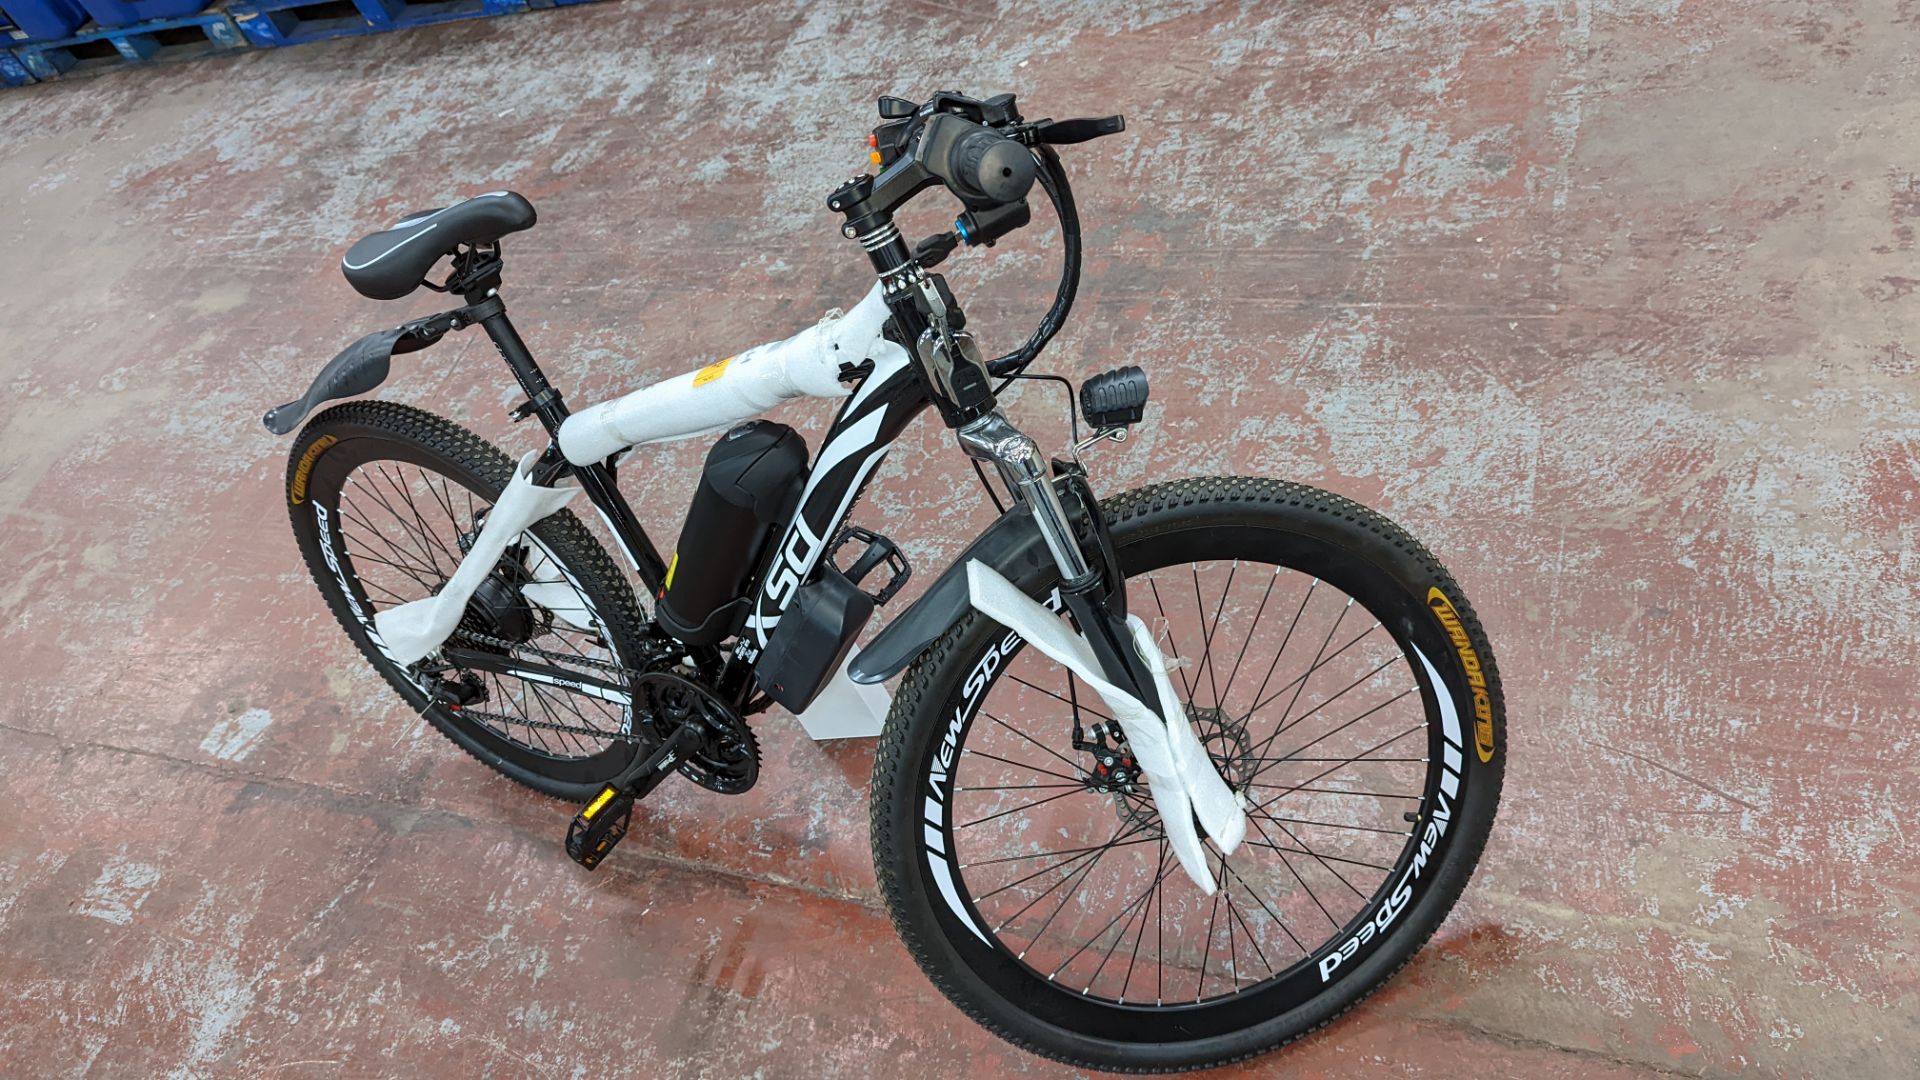 XSD FTX Sport MTB 7.5 Racing electric bike with Shimano Tourney TZ gears. Includes 36v 12AH battery, - Image 7 of 19